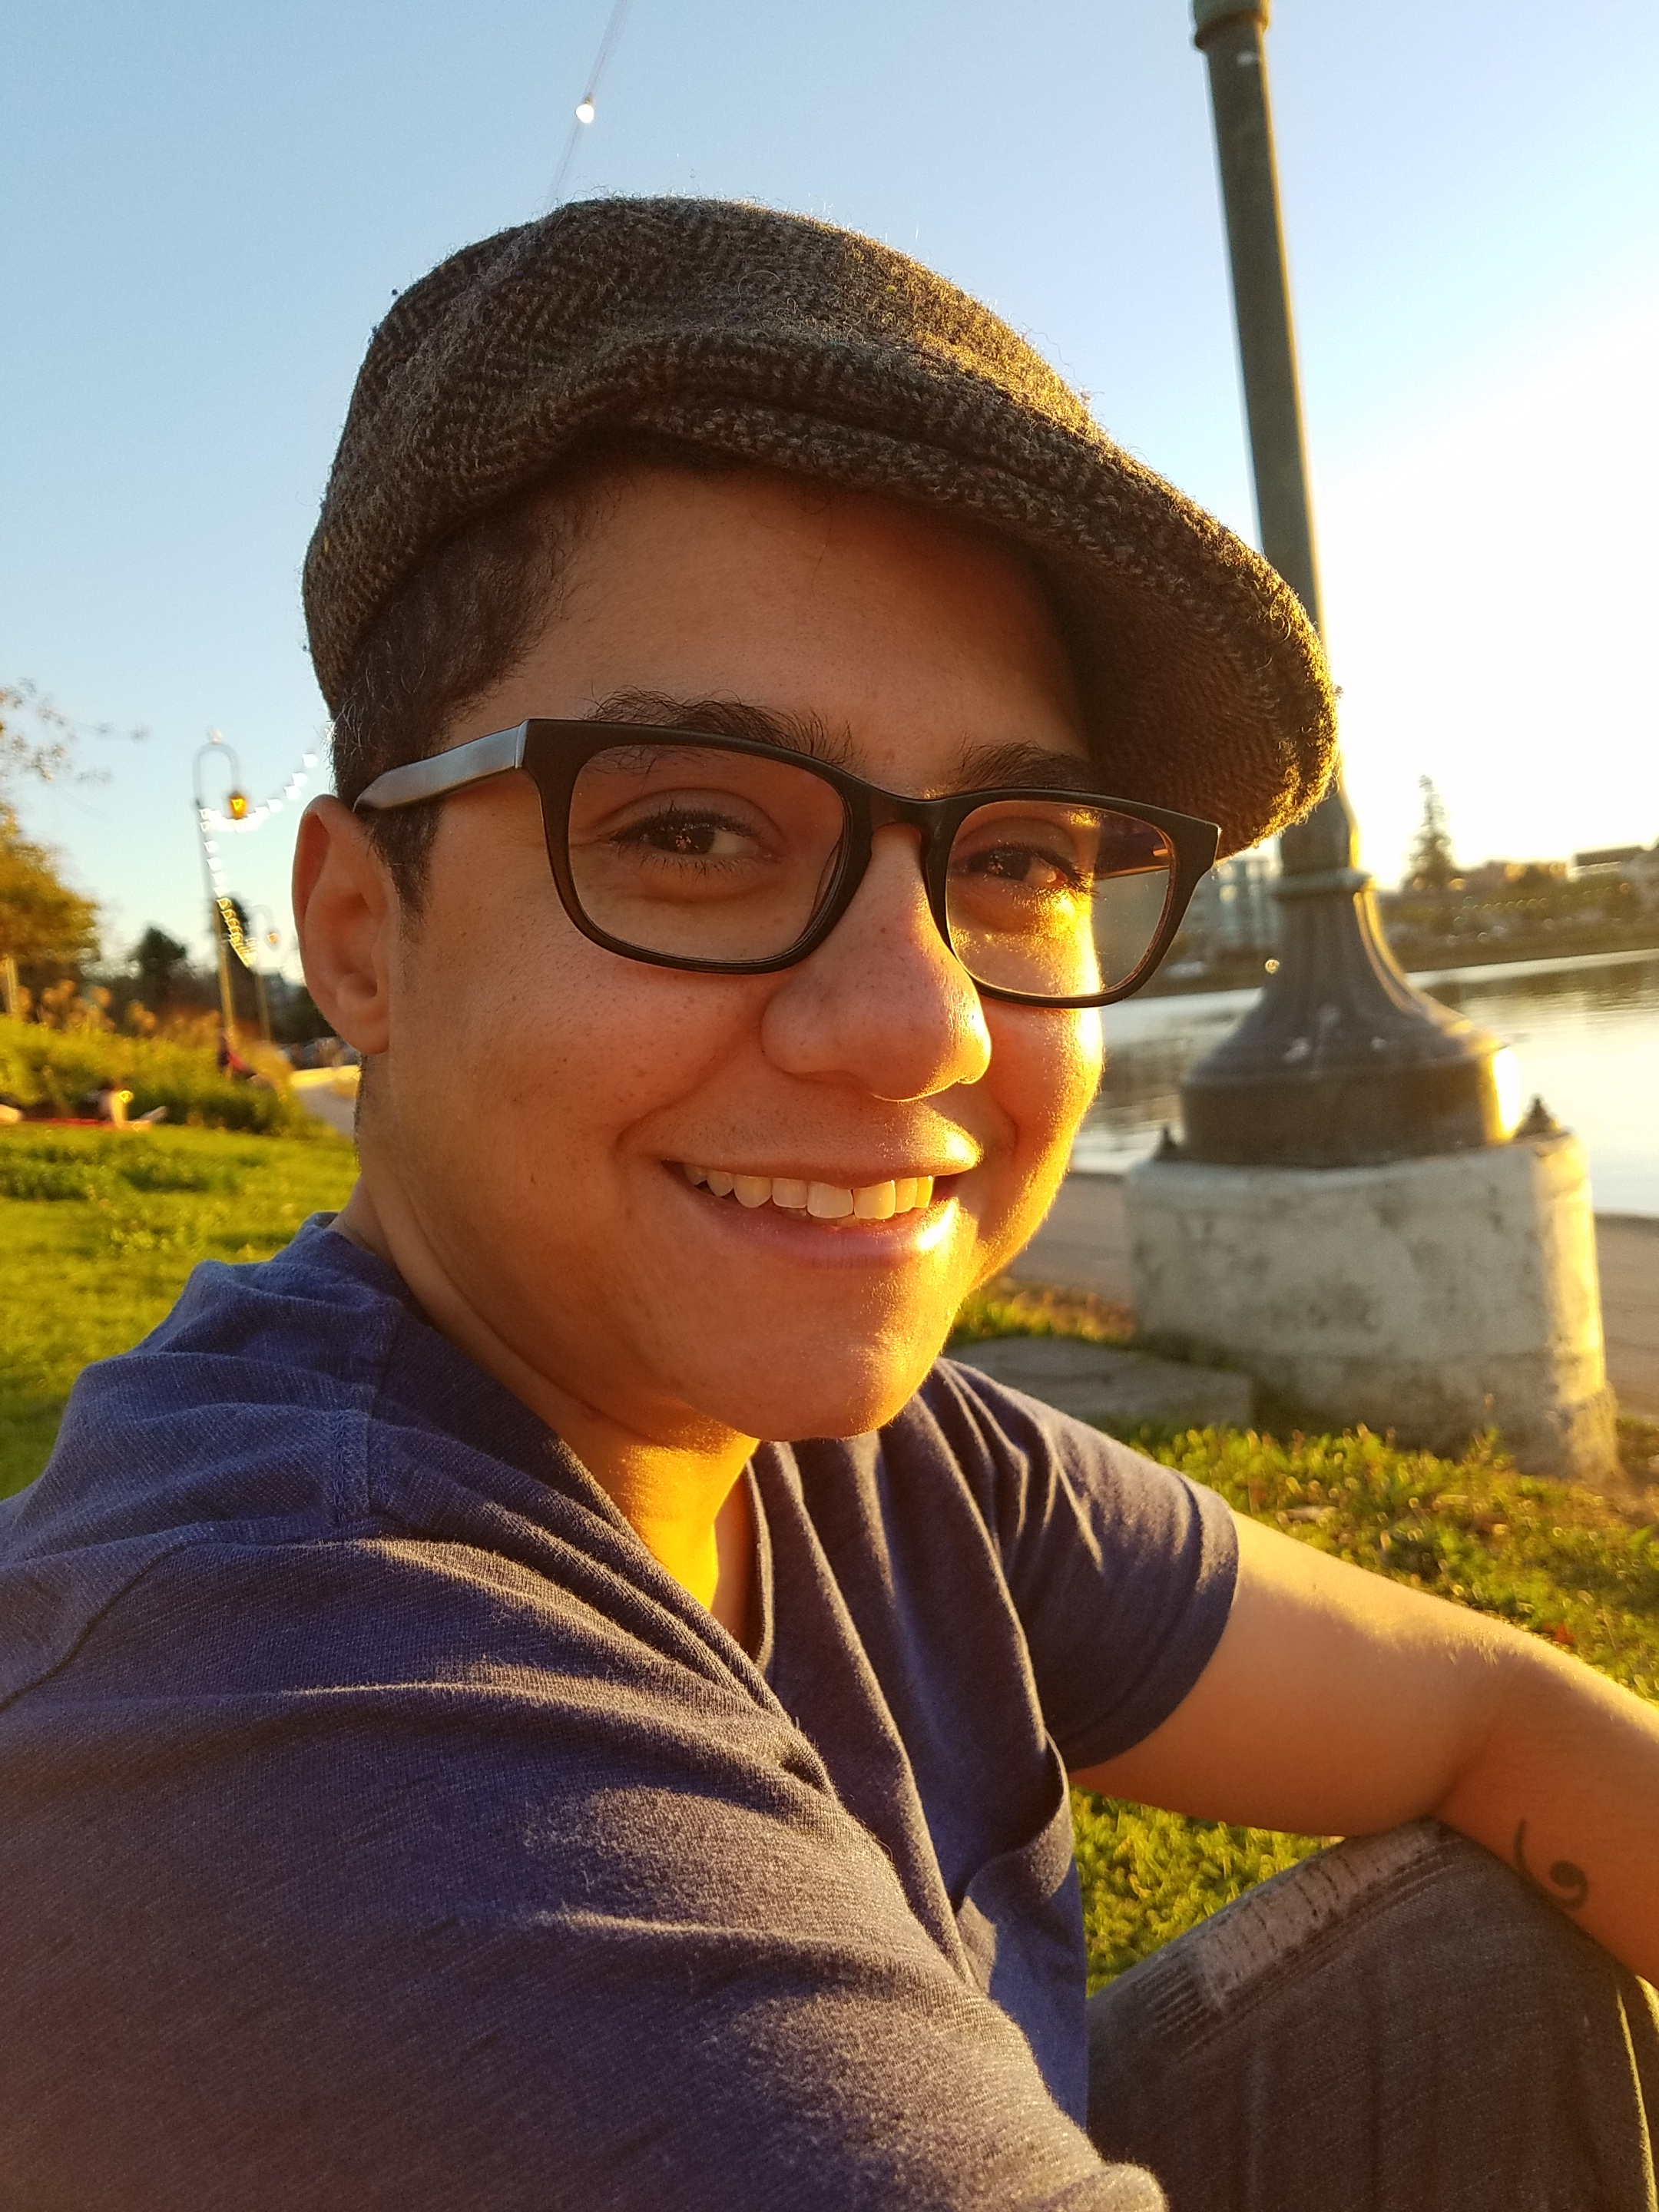 Jack smiles at the camera, wearing a cap and glasses, seated next to Lake Merritt in Oakland